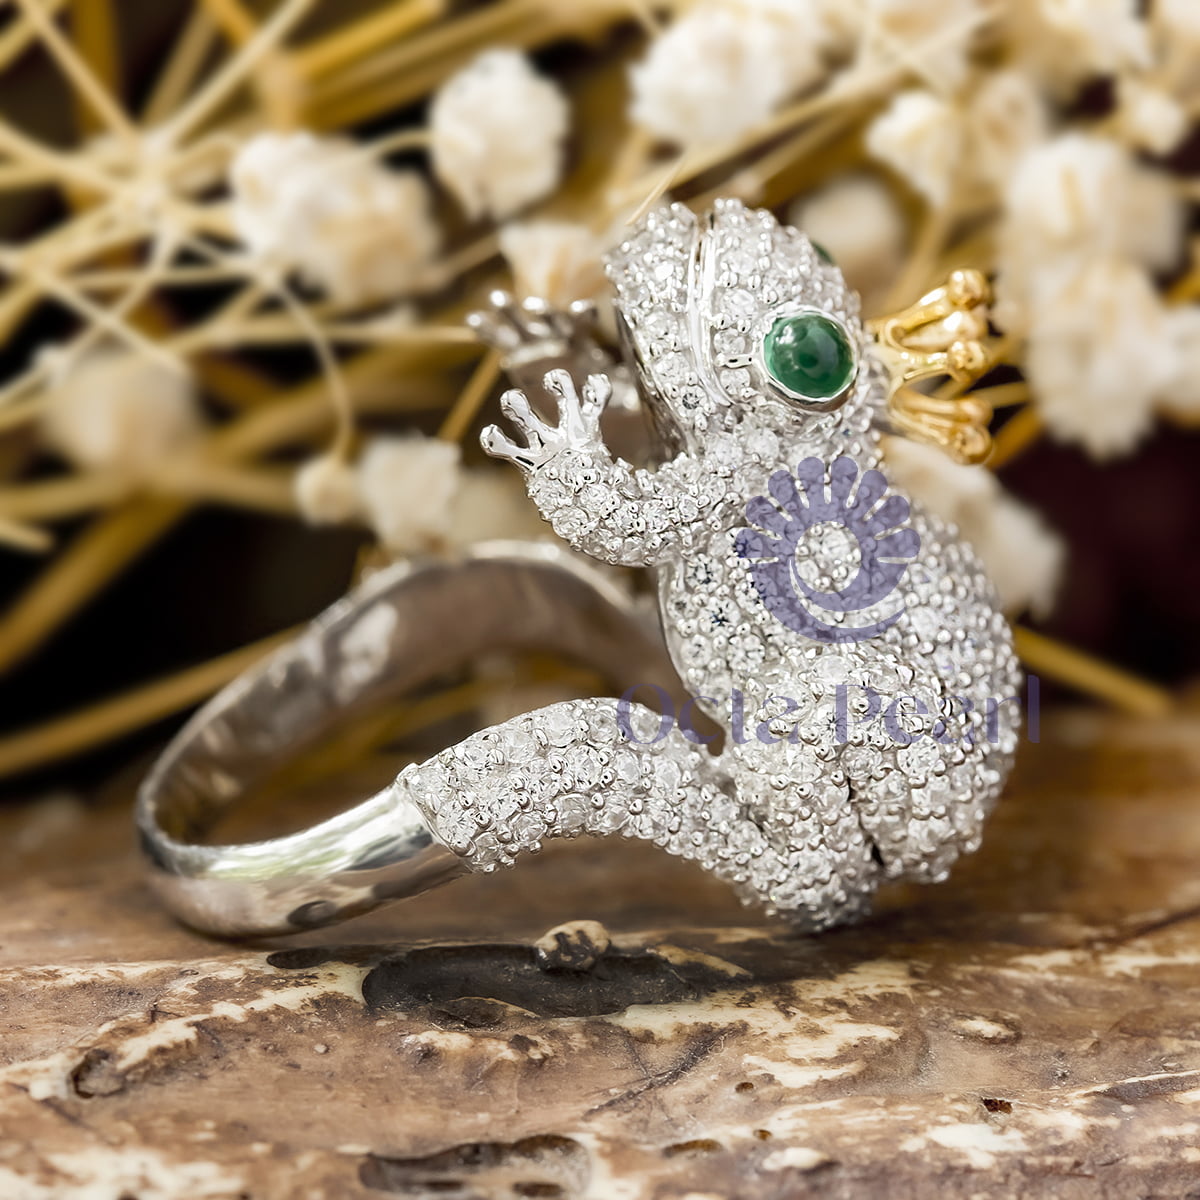 Round Cut CZ Stone Green Eye Queen Frog Cocktail Ring For Any Occasion (3 1/2 TCW)